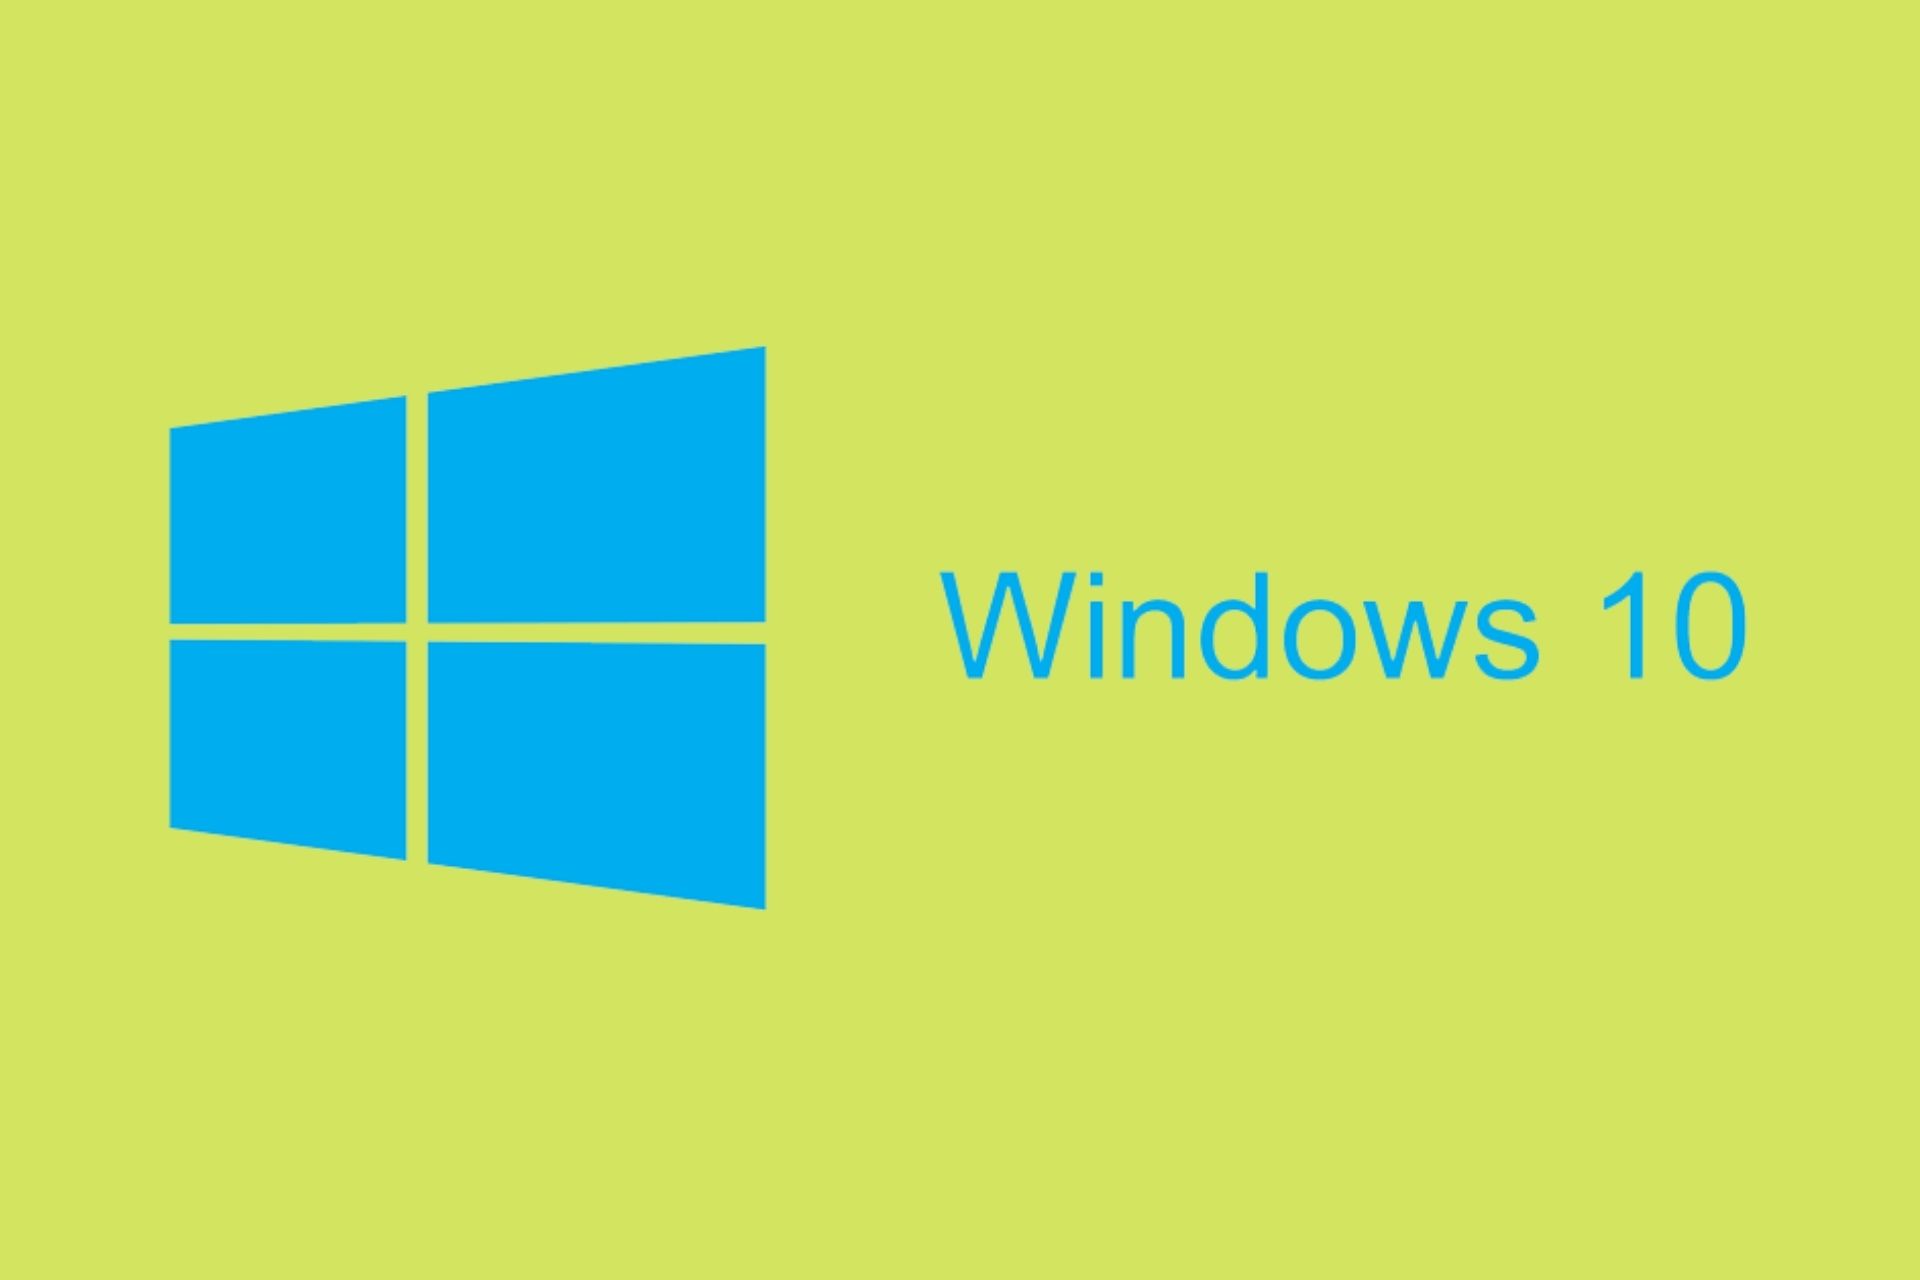 How to download Windows 10 Lean